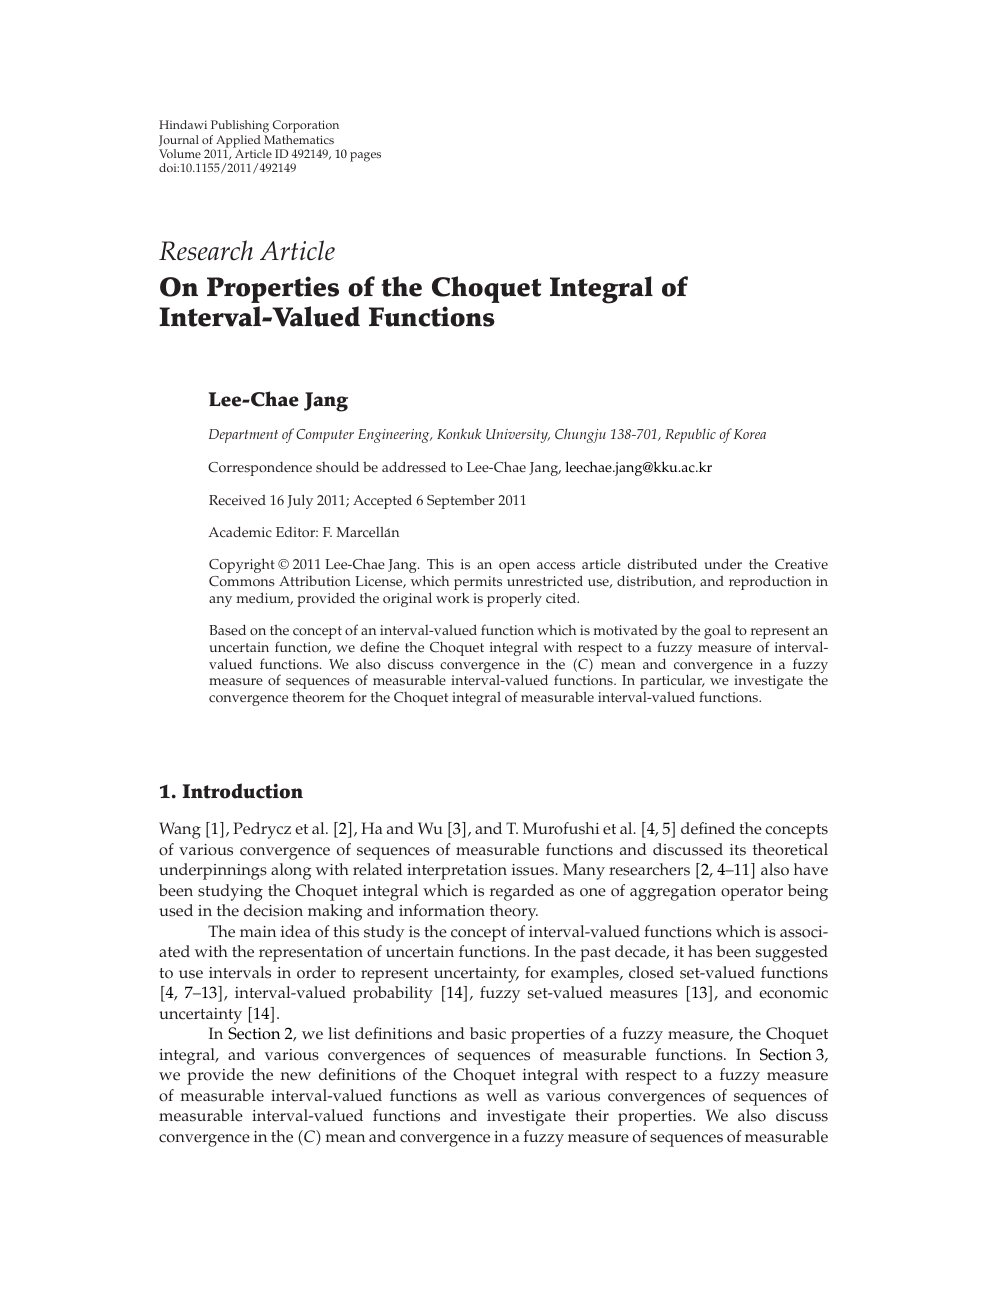 On Properties Of The Choquet Integral Of Interval Valued Functions Topic Of Research Paper In Mathematics Download Scholarly Article Pdf And Read For Free On Cyberleninka Open Science Hub